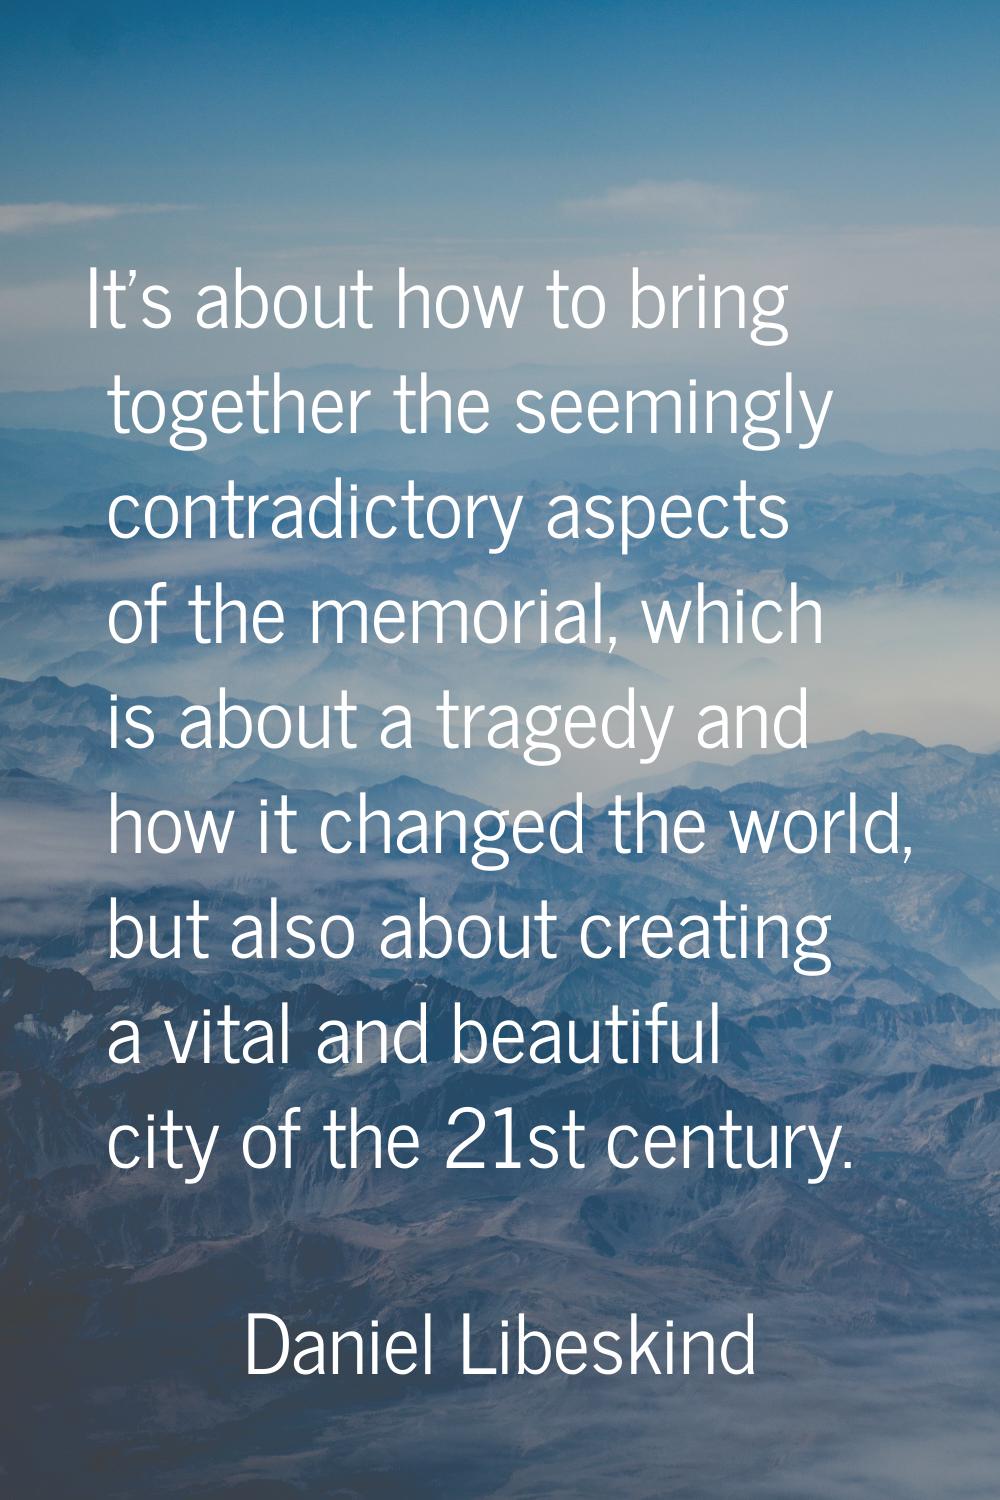 It's about how to bring together the seemingly contradictory aspects of the memorial, which is abou